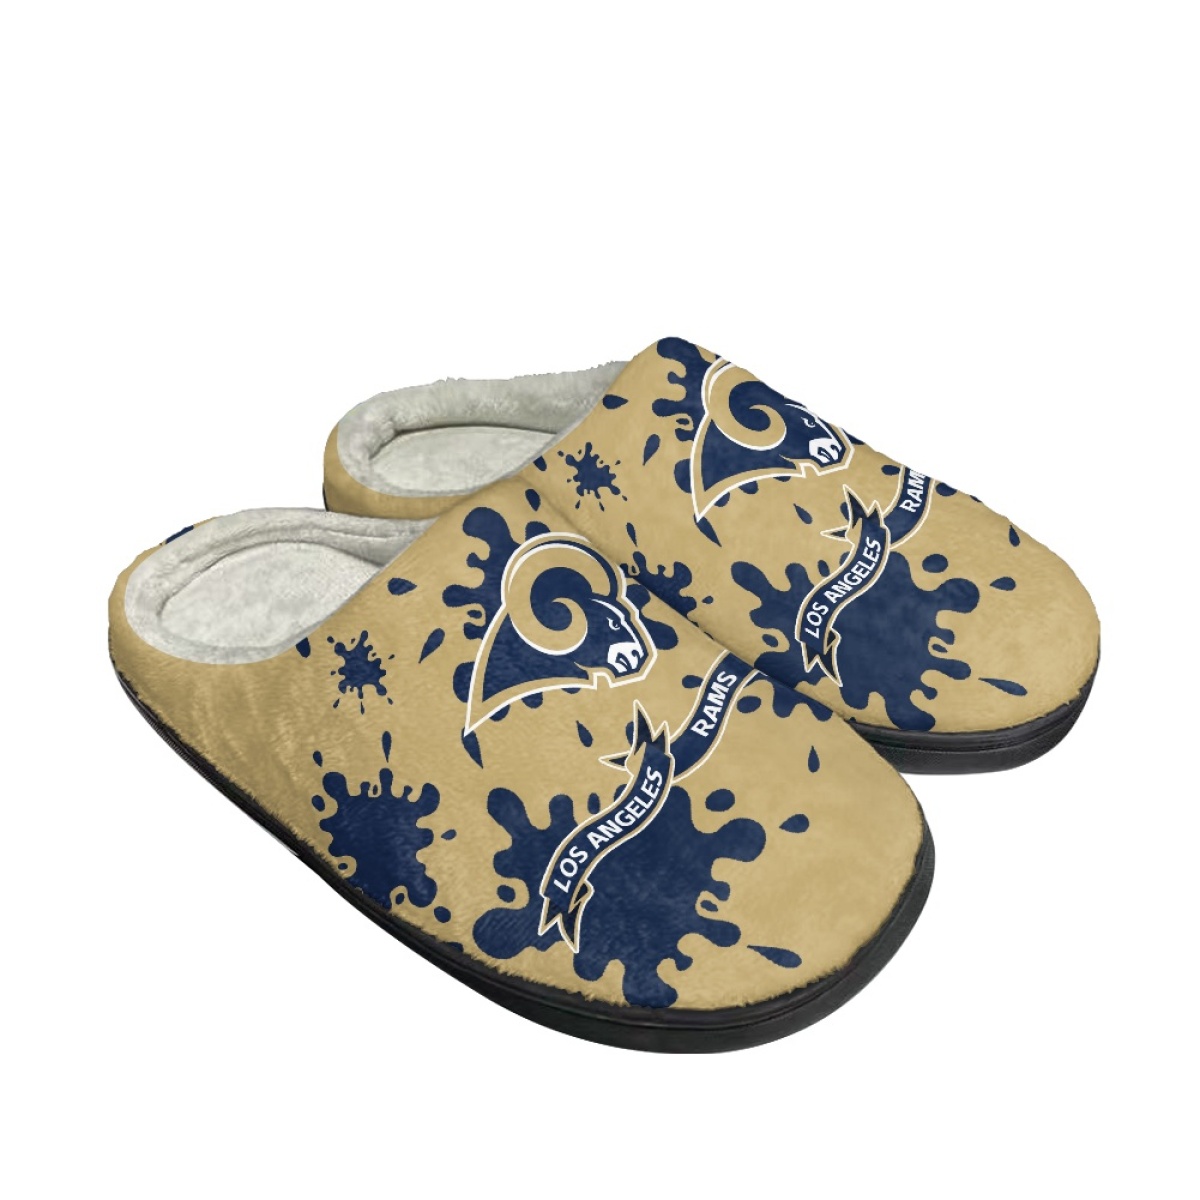 Women's Los Angeles Rams Slippers/Shoes 005